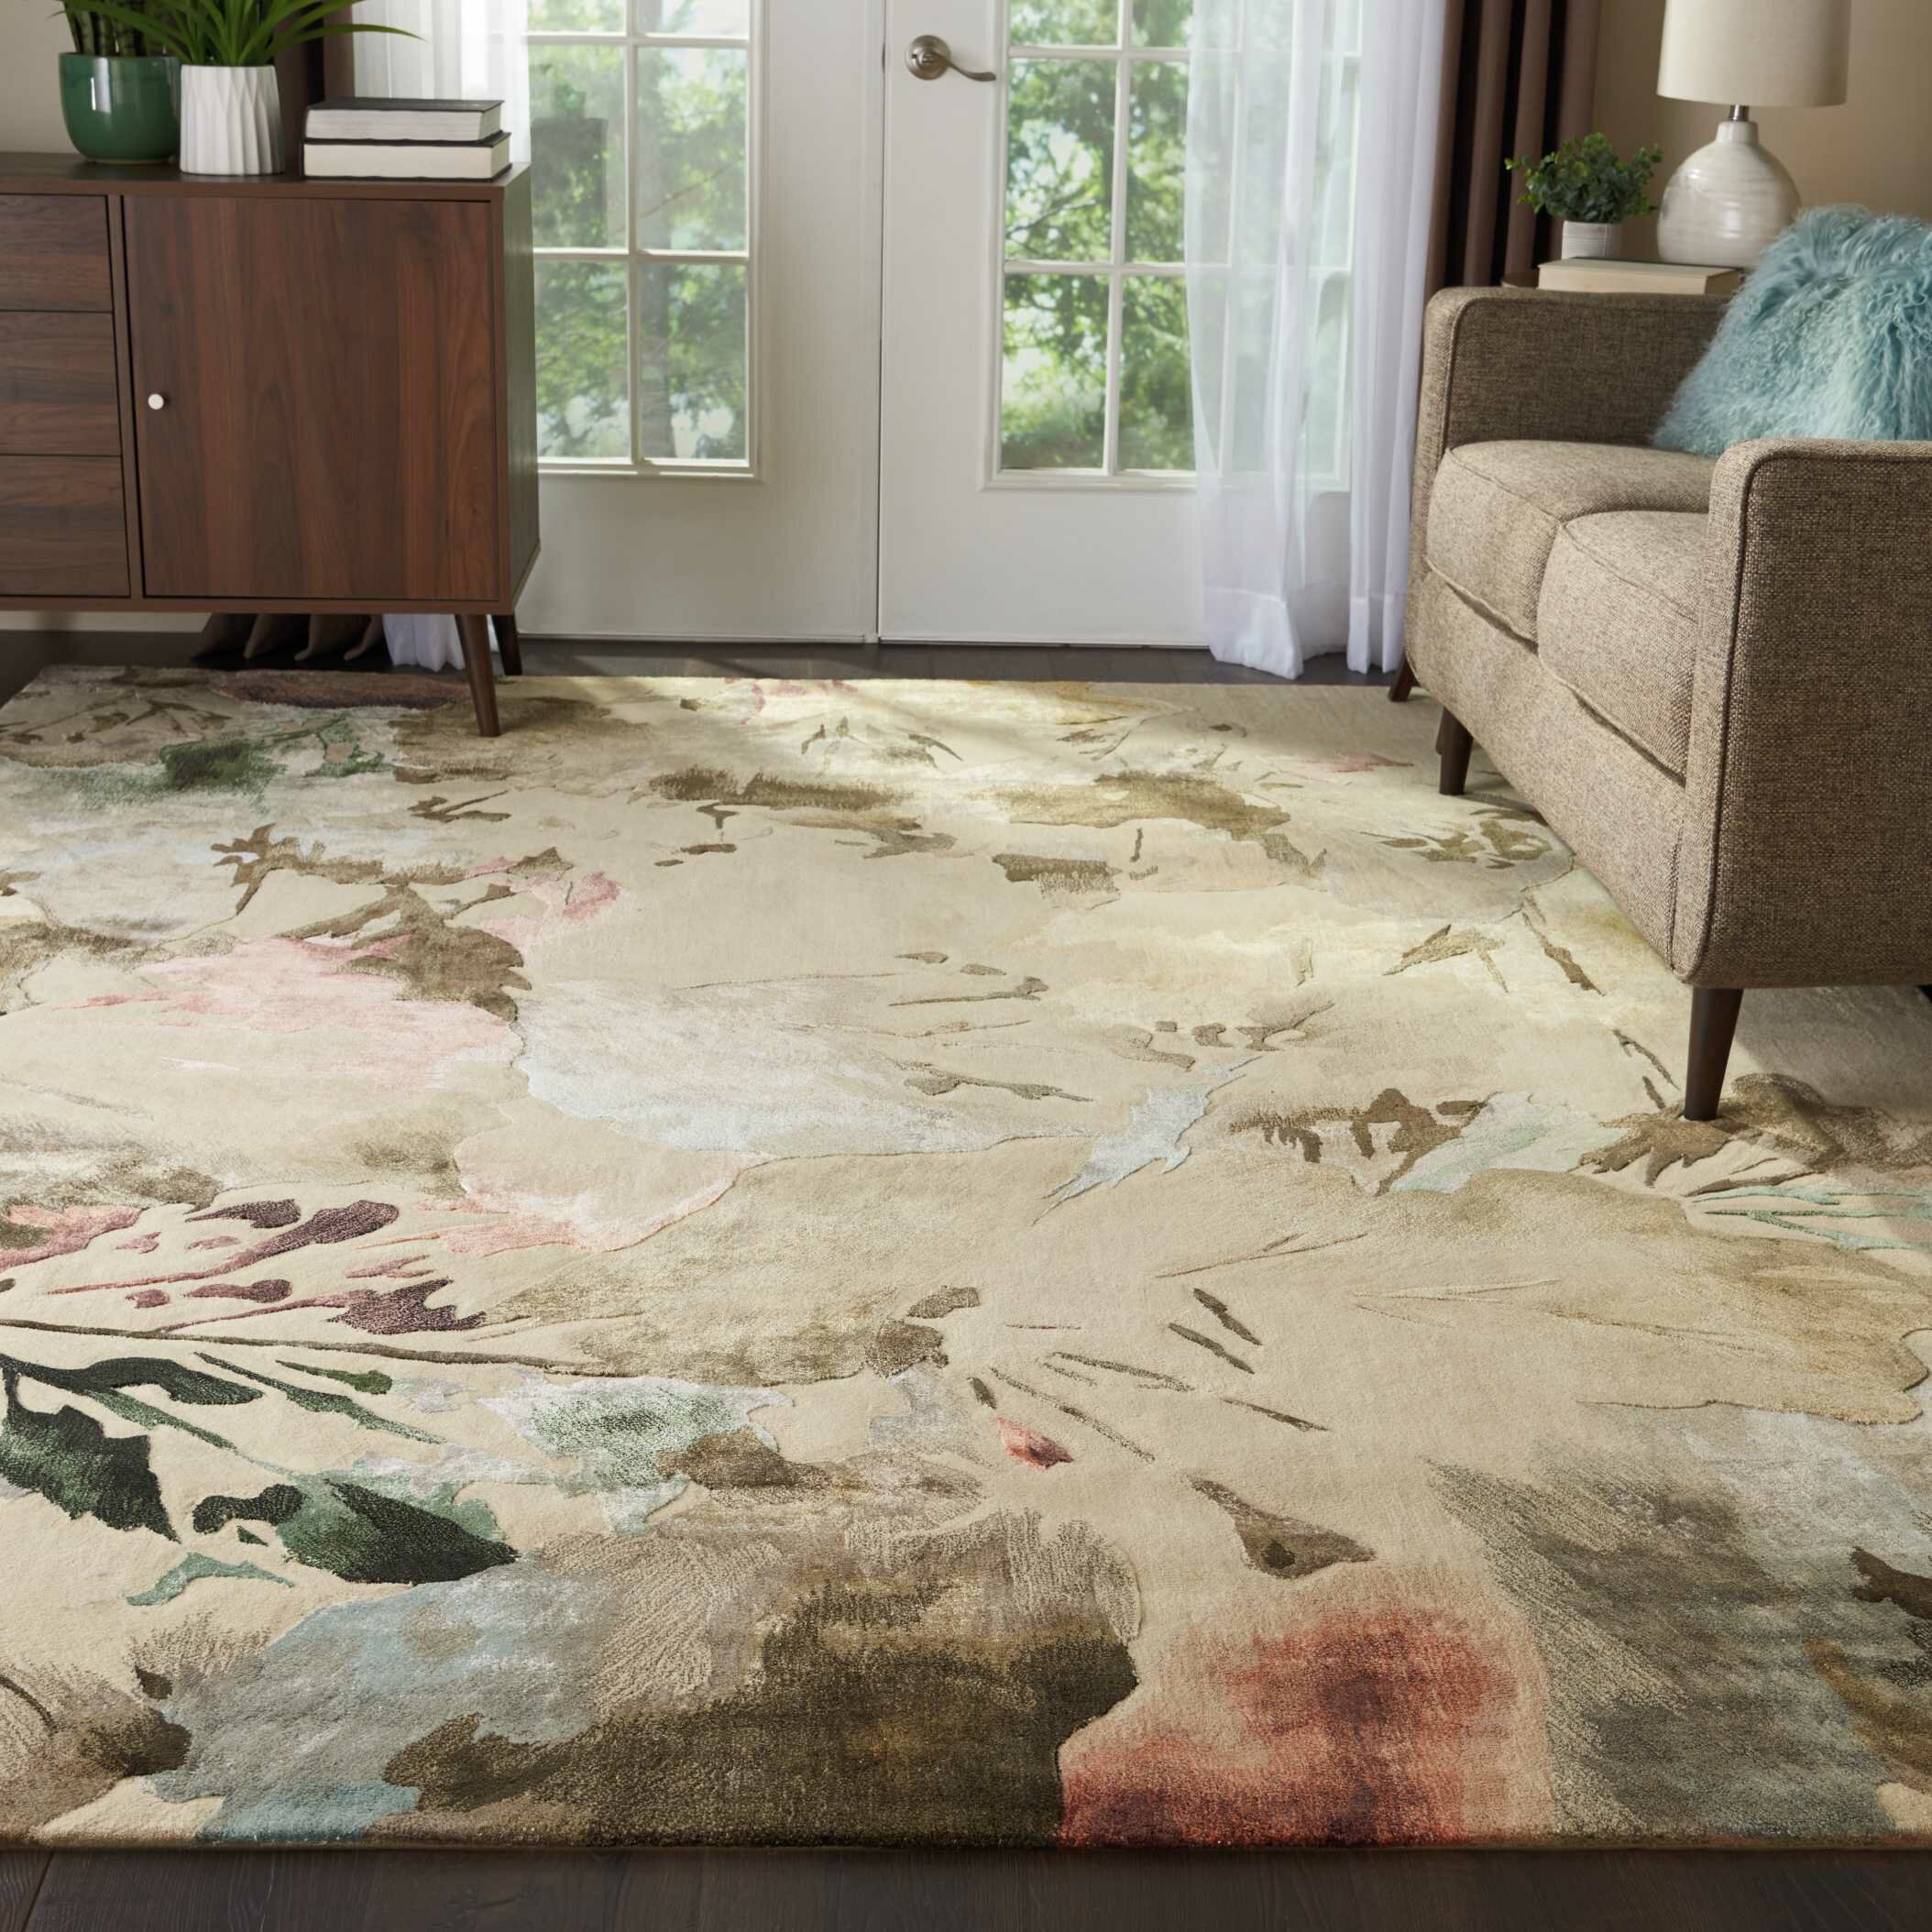 Cream colored hand knotted hand made floral design scatter rug